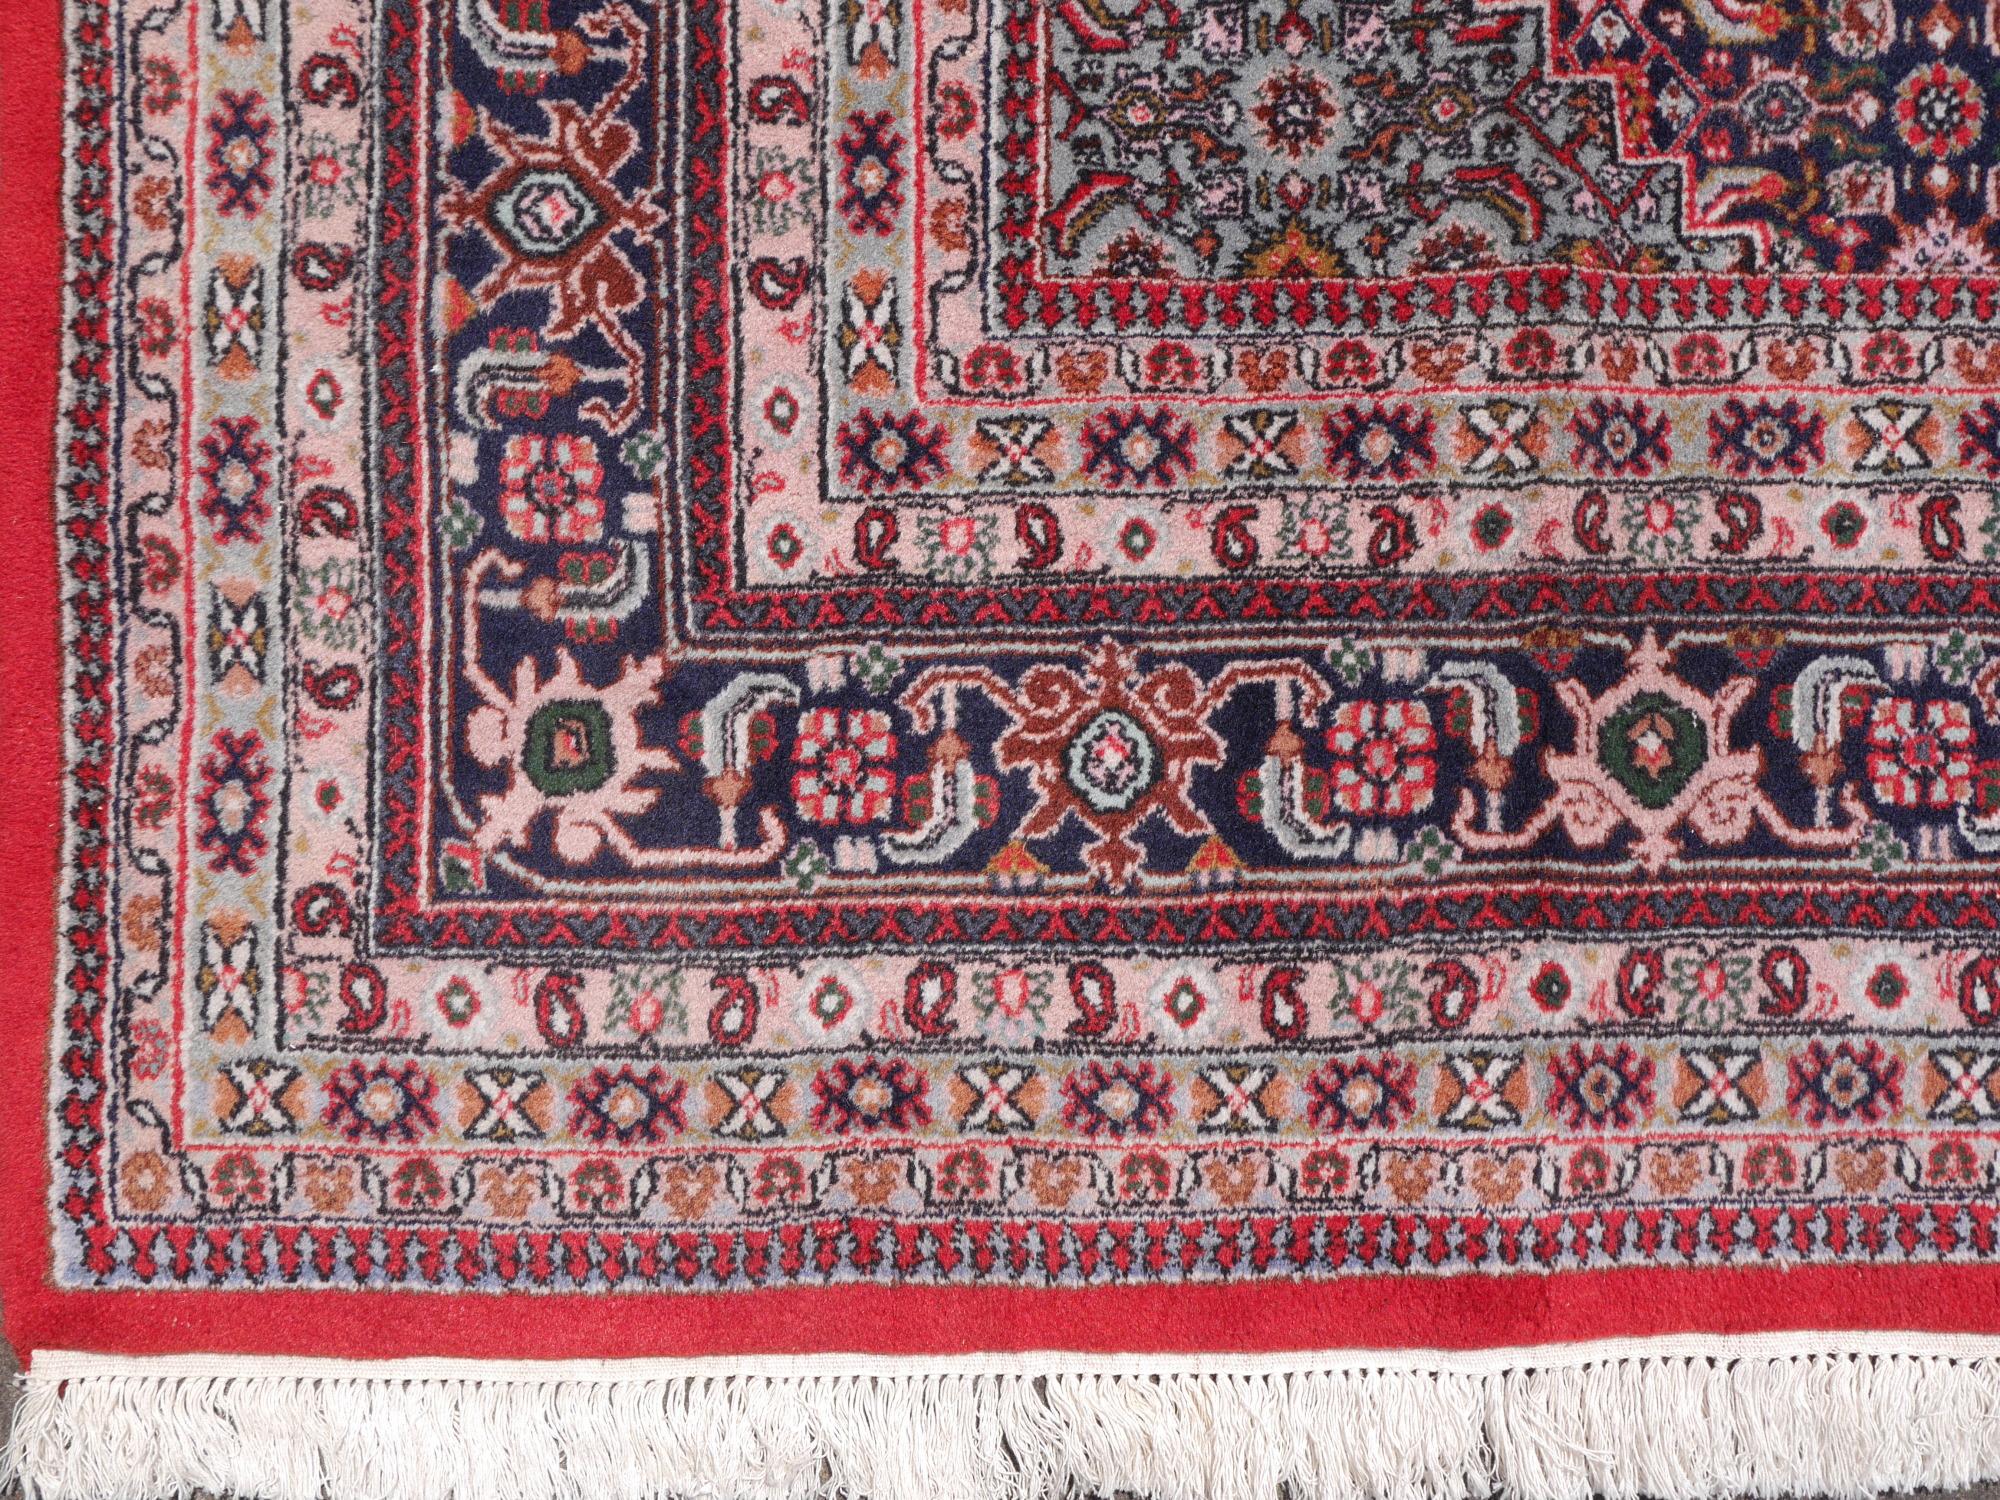 A hand-knotted Oriental rug inred and blue, made in the 1980s. Pile is pure wool, warp and weft is cotton. The rug is in very good condition with vibrant colors.

Pile material: Fine wool, very good pile
Weft material: Cotton
Warp material: